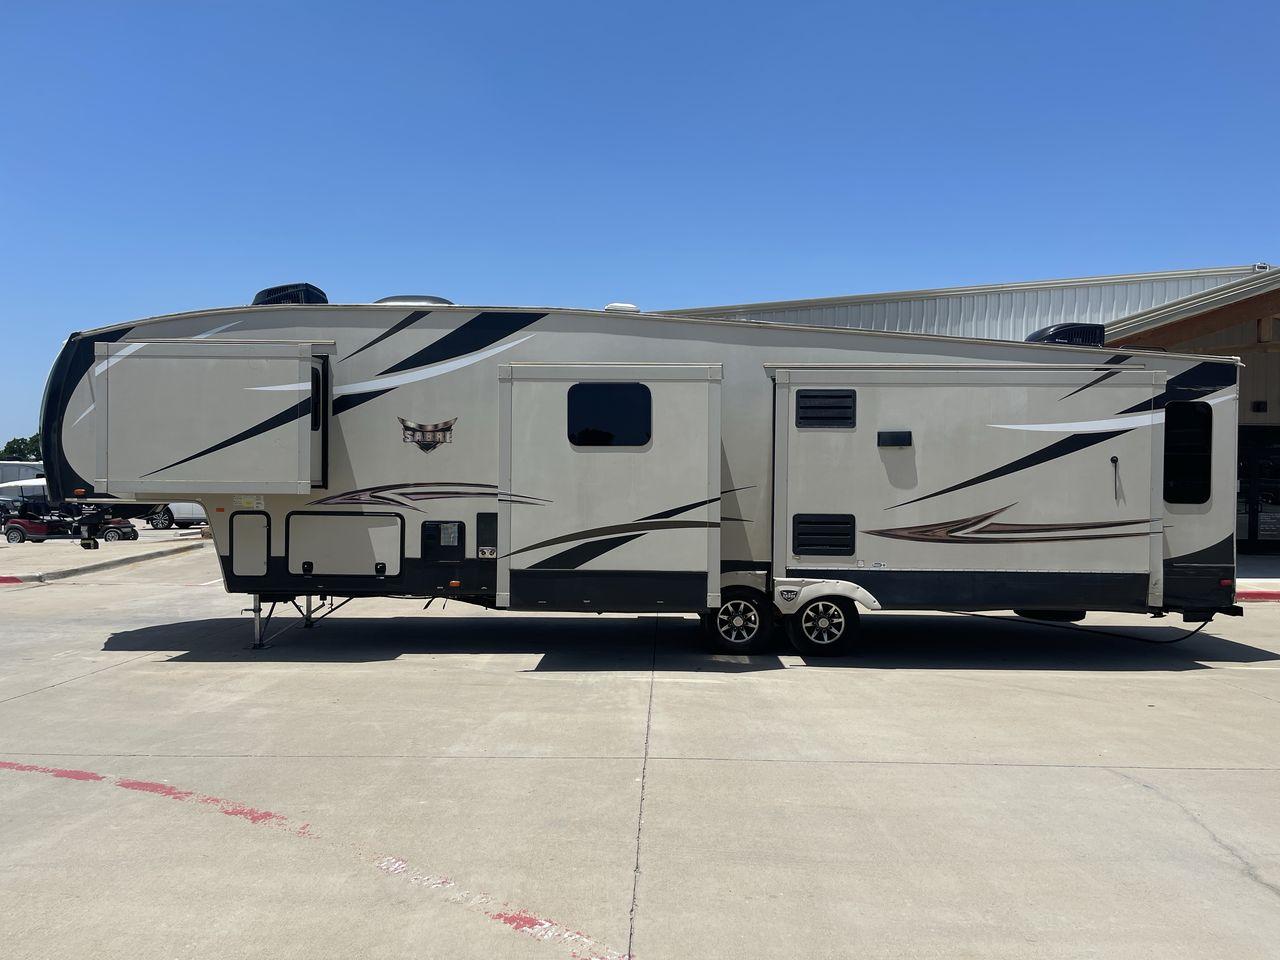 2017 FOREST RIVER SABRE 365MB (4X4FSRN22H3) , Length: 42.42 ft | Dry Weight: 12,994 lbs | Gross Weight: 15,500 lbs | Slides: 4 transmission, located at 4319 N Main Street, Cleburne, TX, 76033, (817) 221-0660, 32.435829, -97.384178 - The 2017 Forest River Sabre 365MB is a roomy fifth wheel that is meant to make camping trips more comfortable. With its spacious layout and thoughtful features, this RV provides a luxury home away from home. The unit measures 42.42 feet in length and weighs 12,994 lbs. dry, offers enough space for r - Photo #24